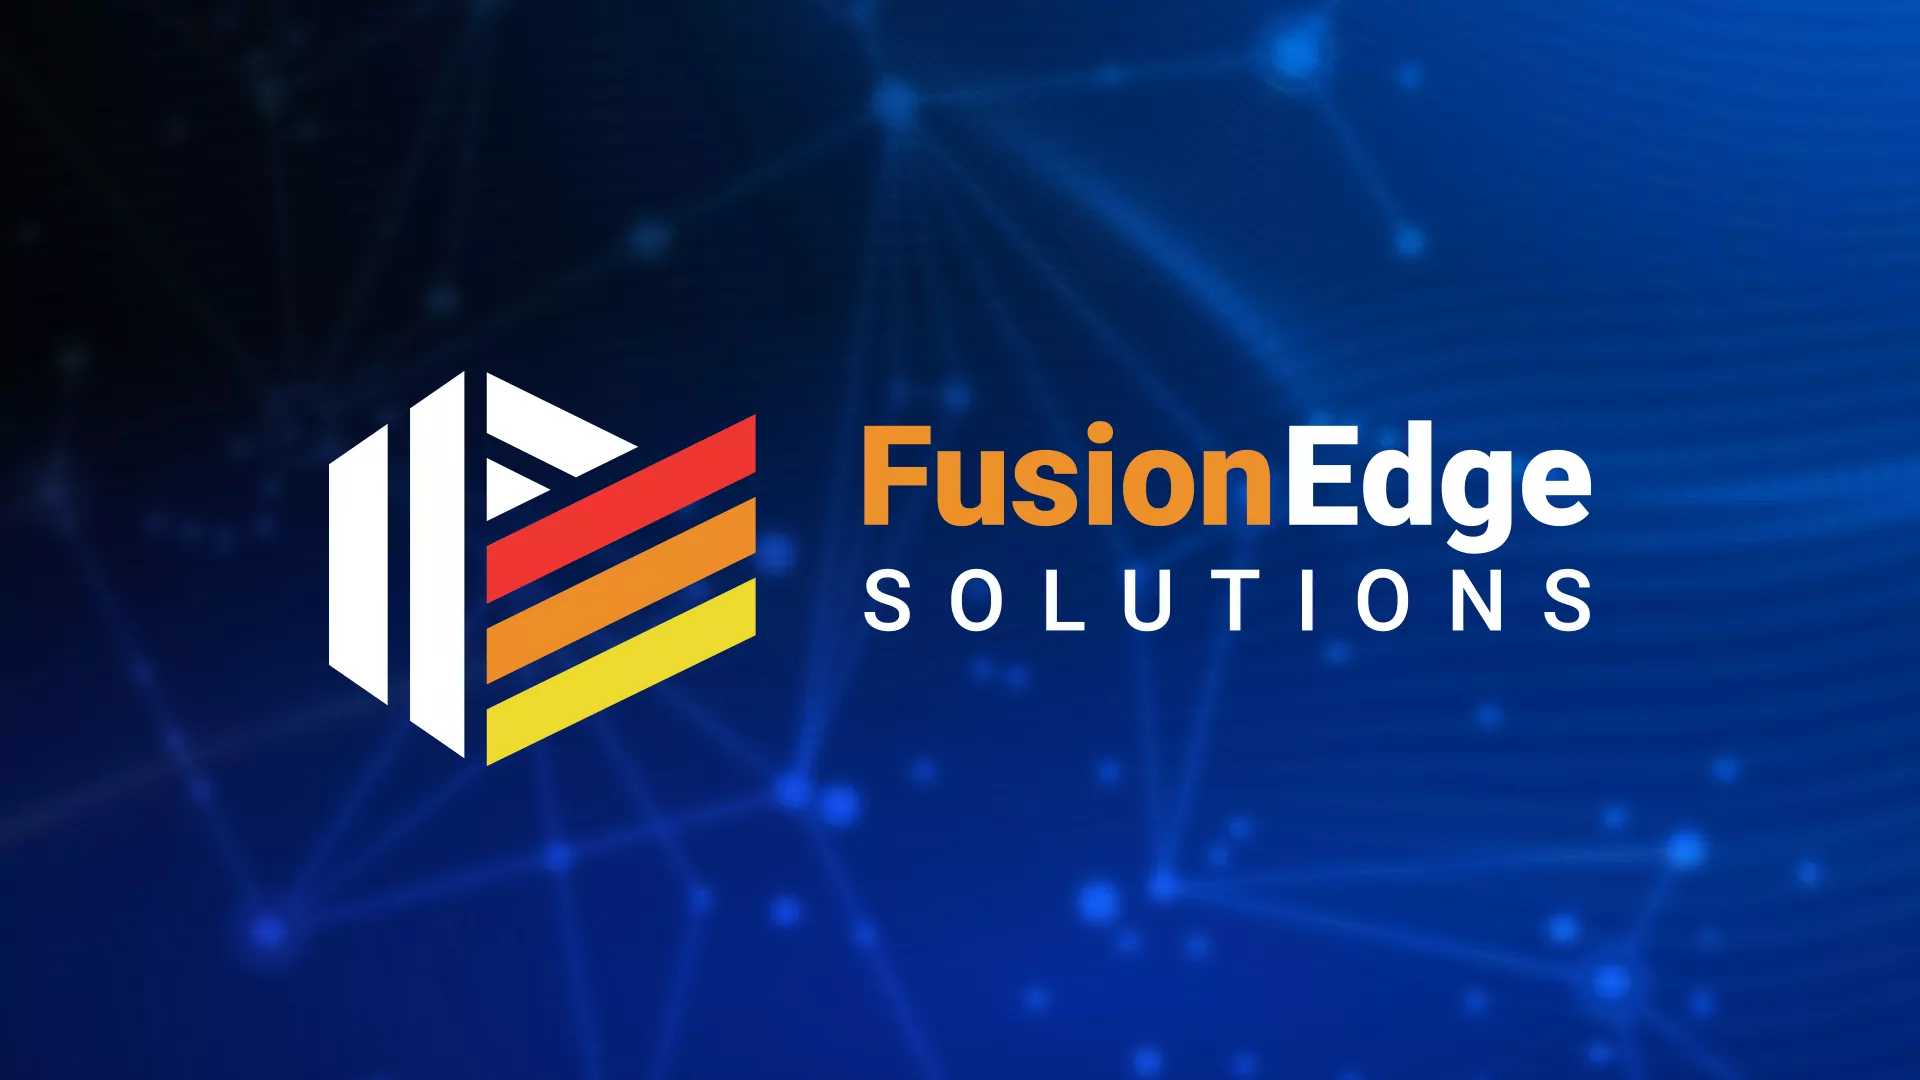 FusionEdge Solutions: A Joint Venture Between TechSur Solutions and REI Systems